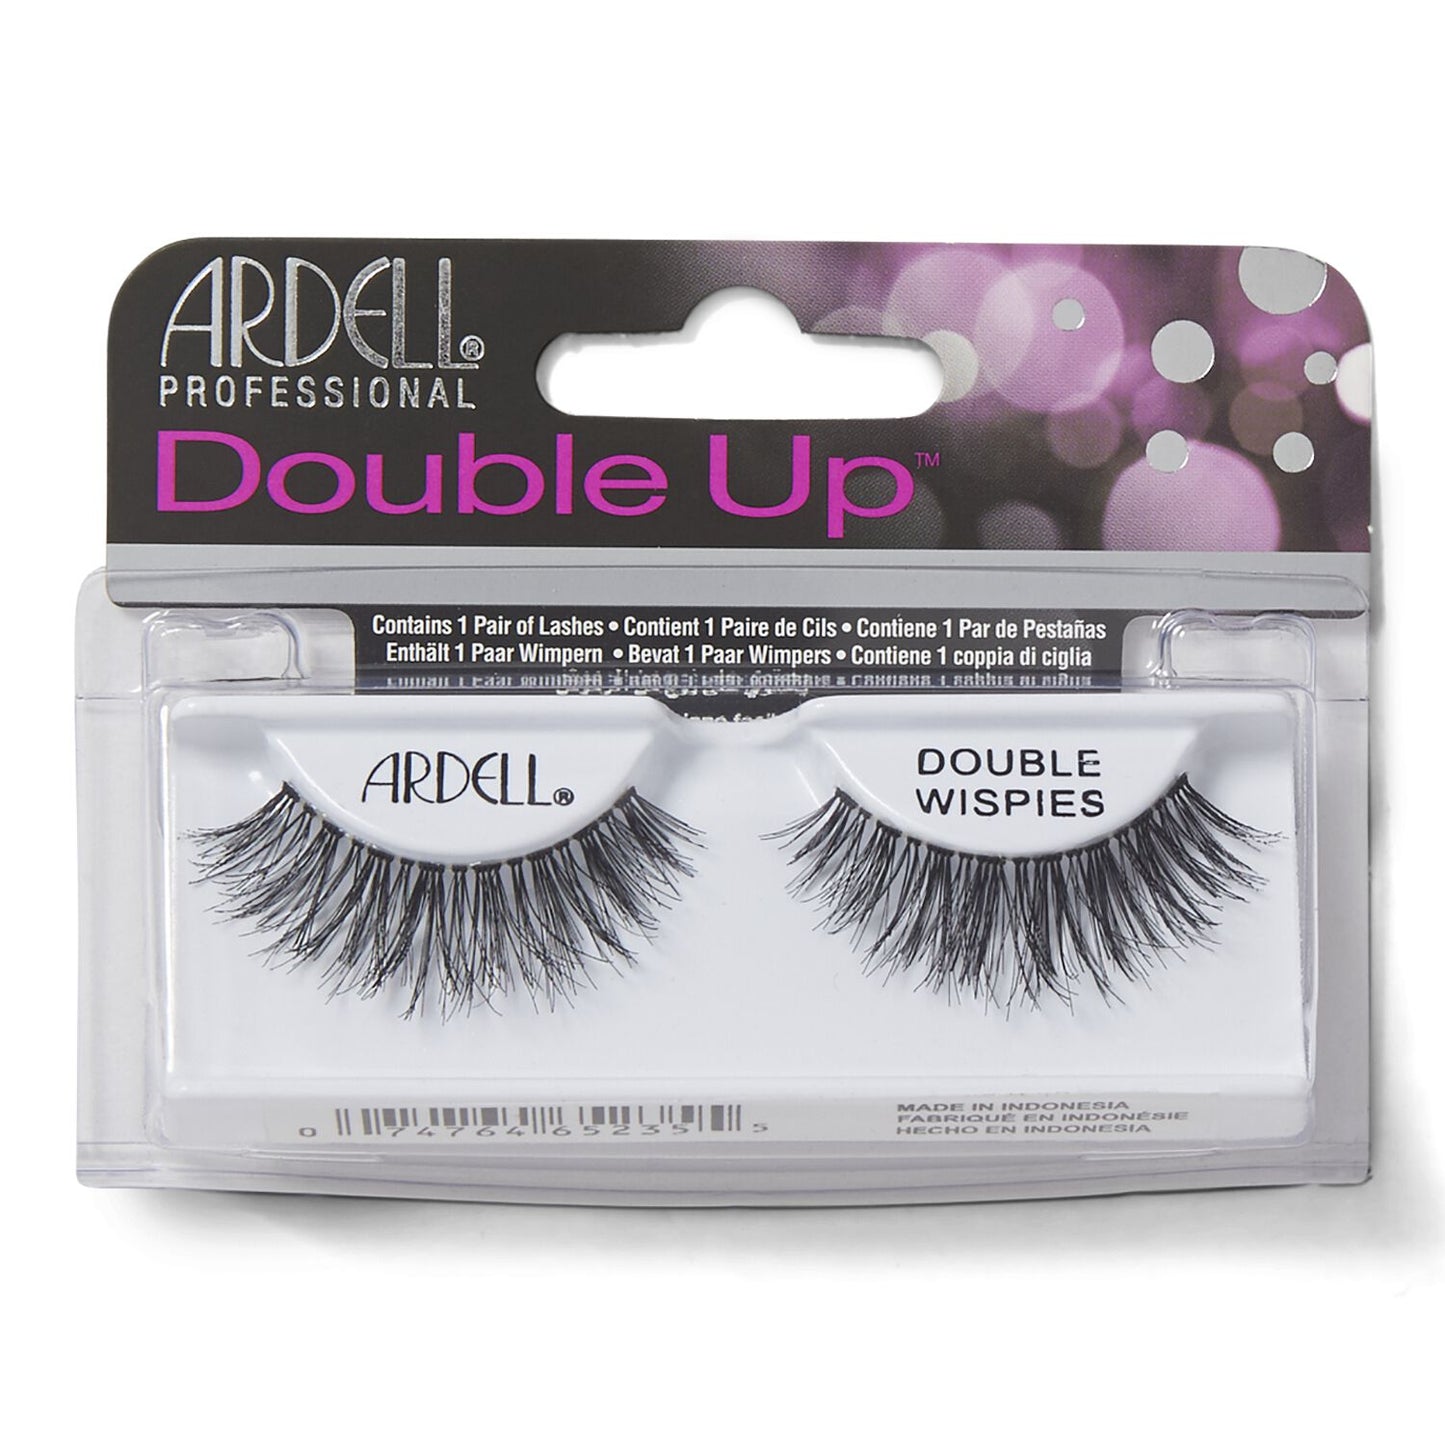 Double Up Lashes  by   Ardell Double Up Double Wispies Eyelashes